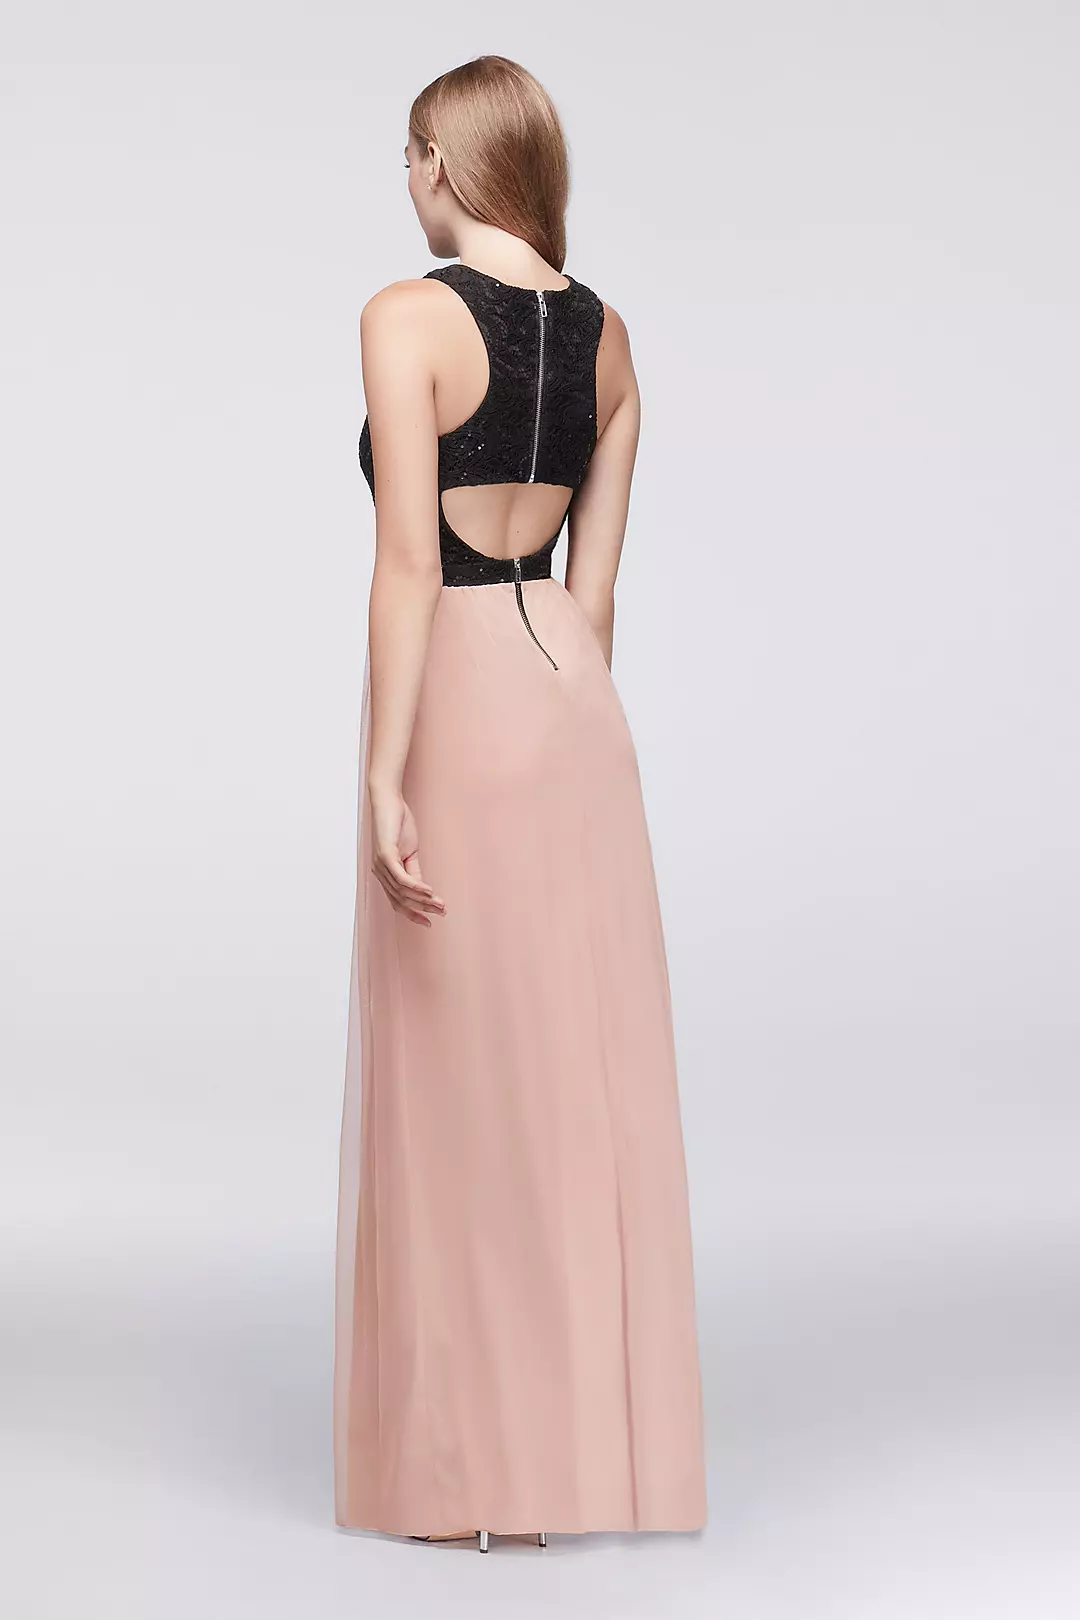 Sequin Lace and Mesh Maxi Dress with Open Back Image 2